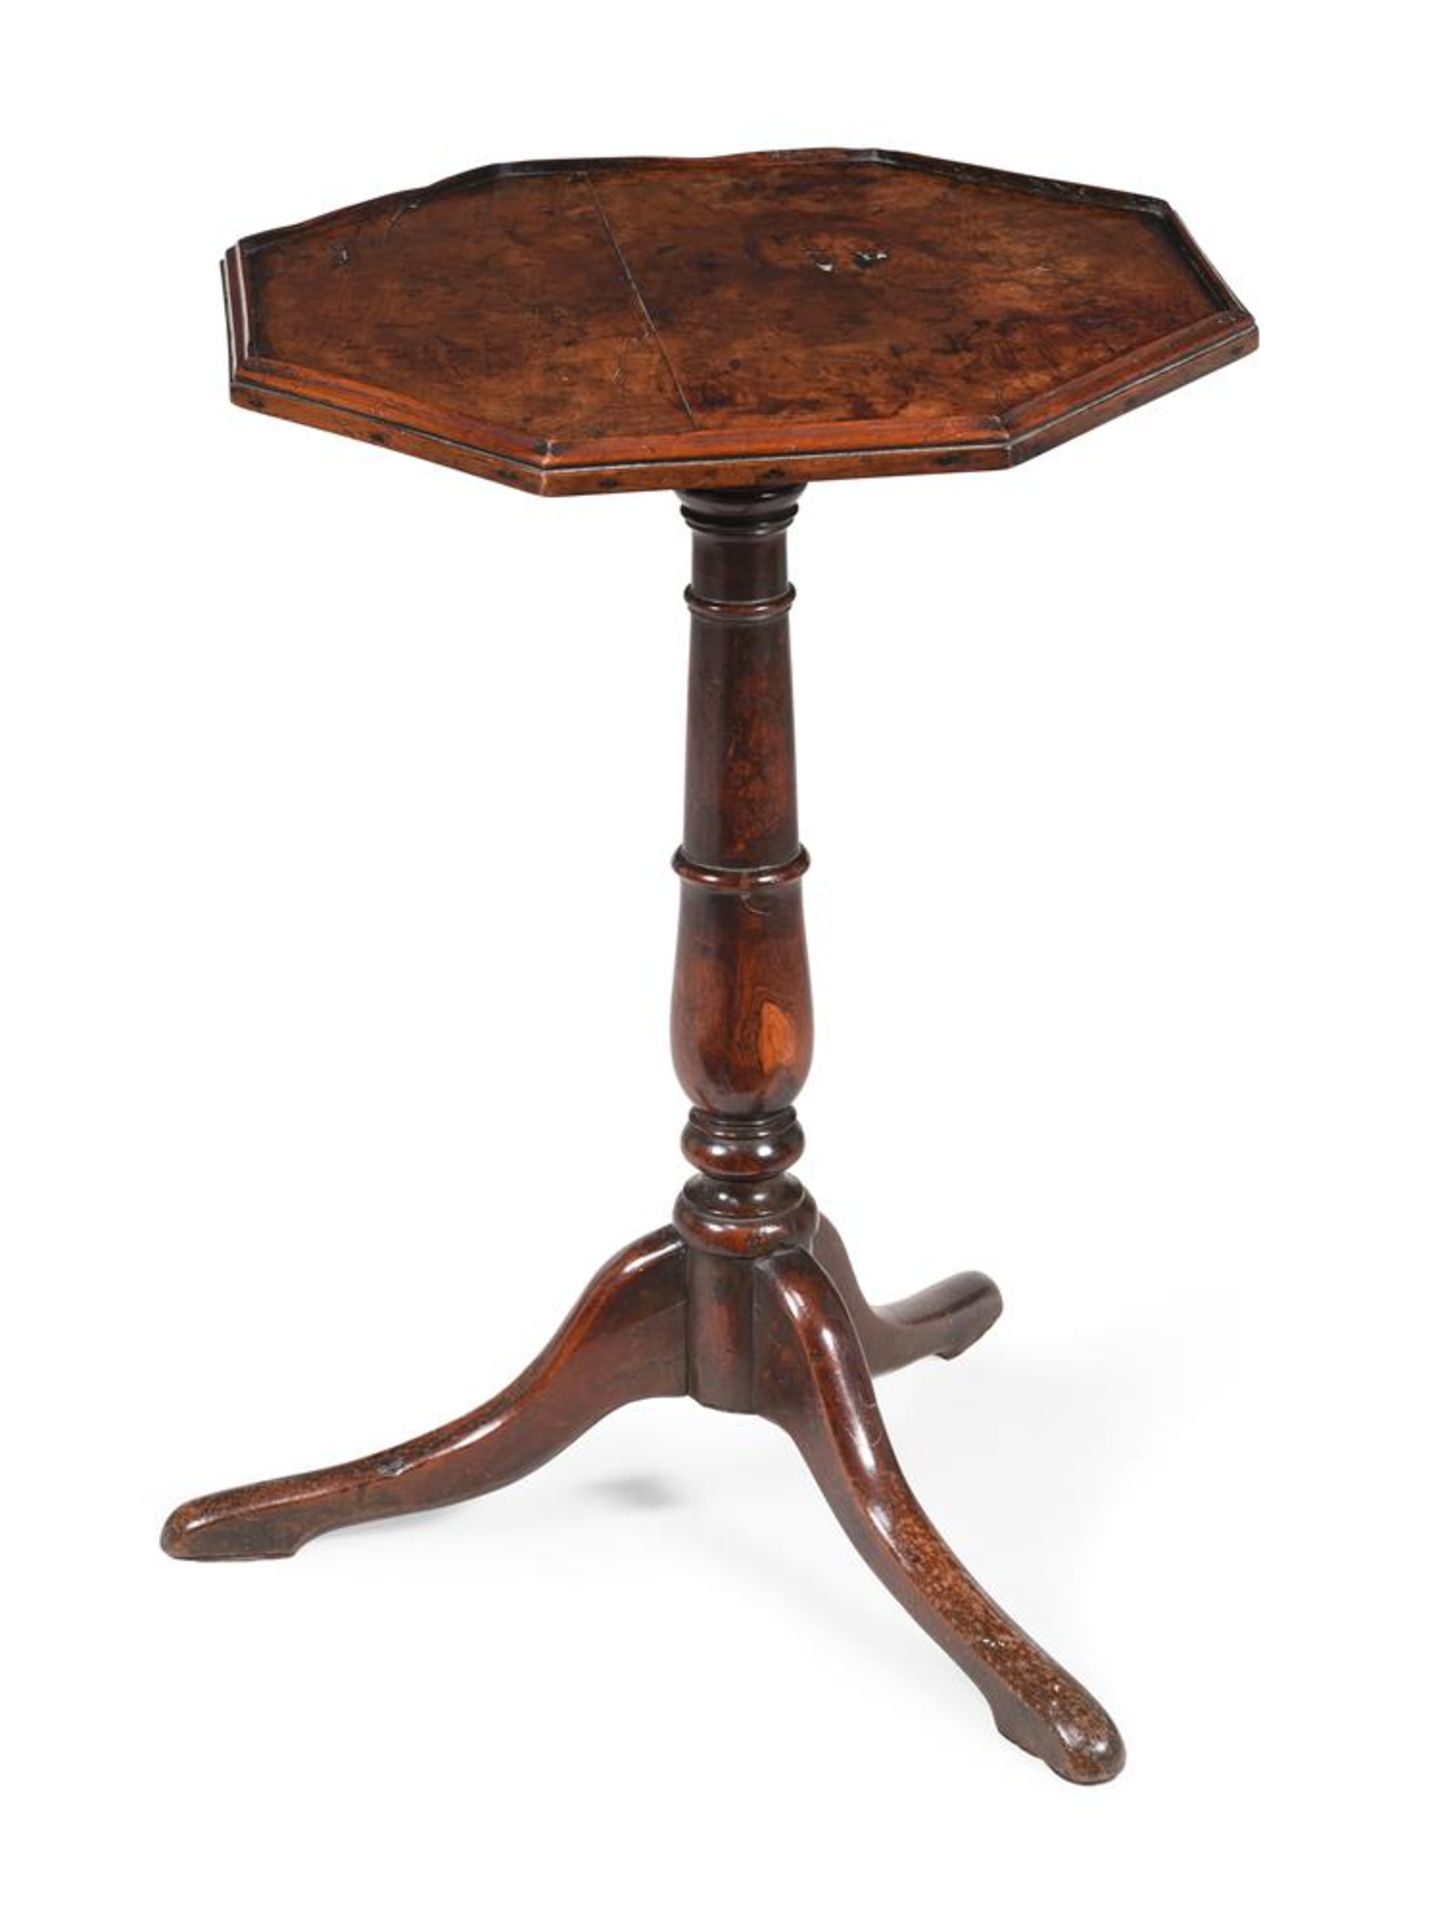 A GEORGE II YEW WOOD OCTAGONAL TRIPOD TABLE, LATE 18TH/EARLY 19TH CENTURY - Image 2 of 4